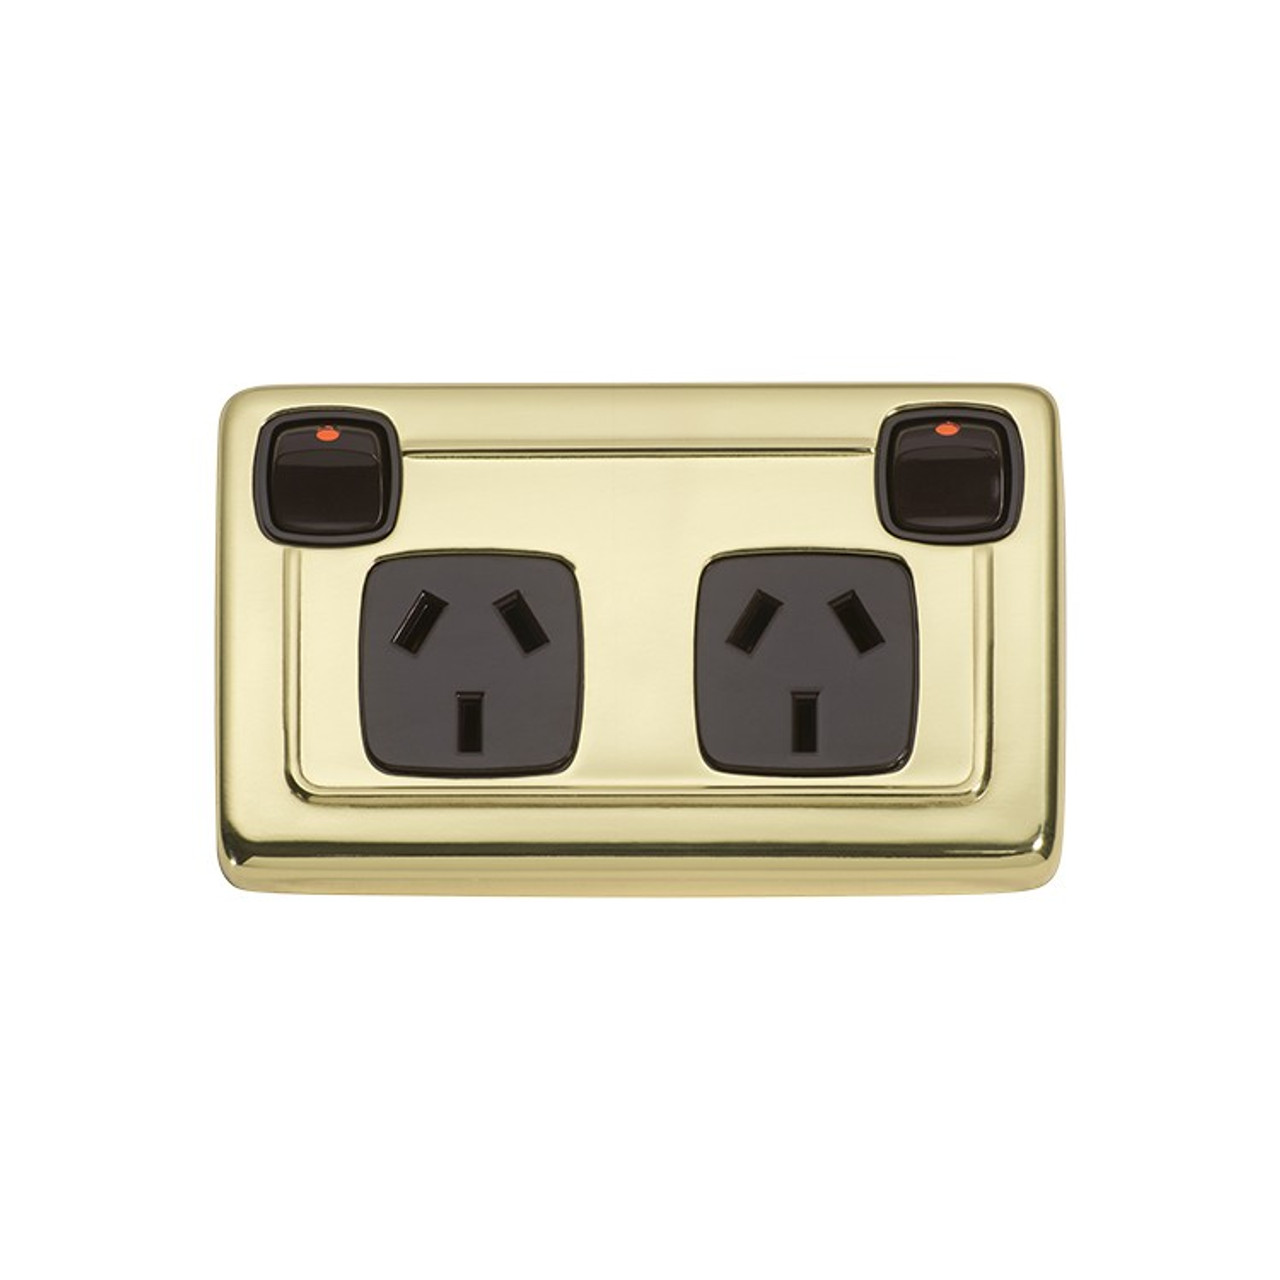 Polished Brass Double GPO Heritage Power Point - with Brown Inserts 5809